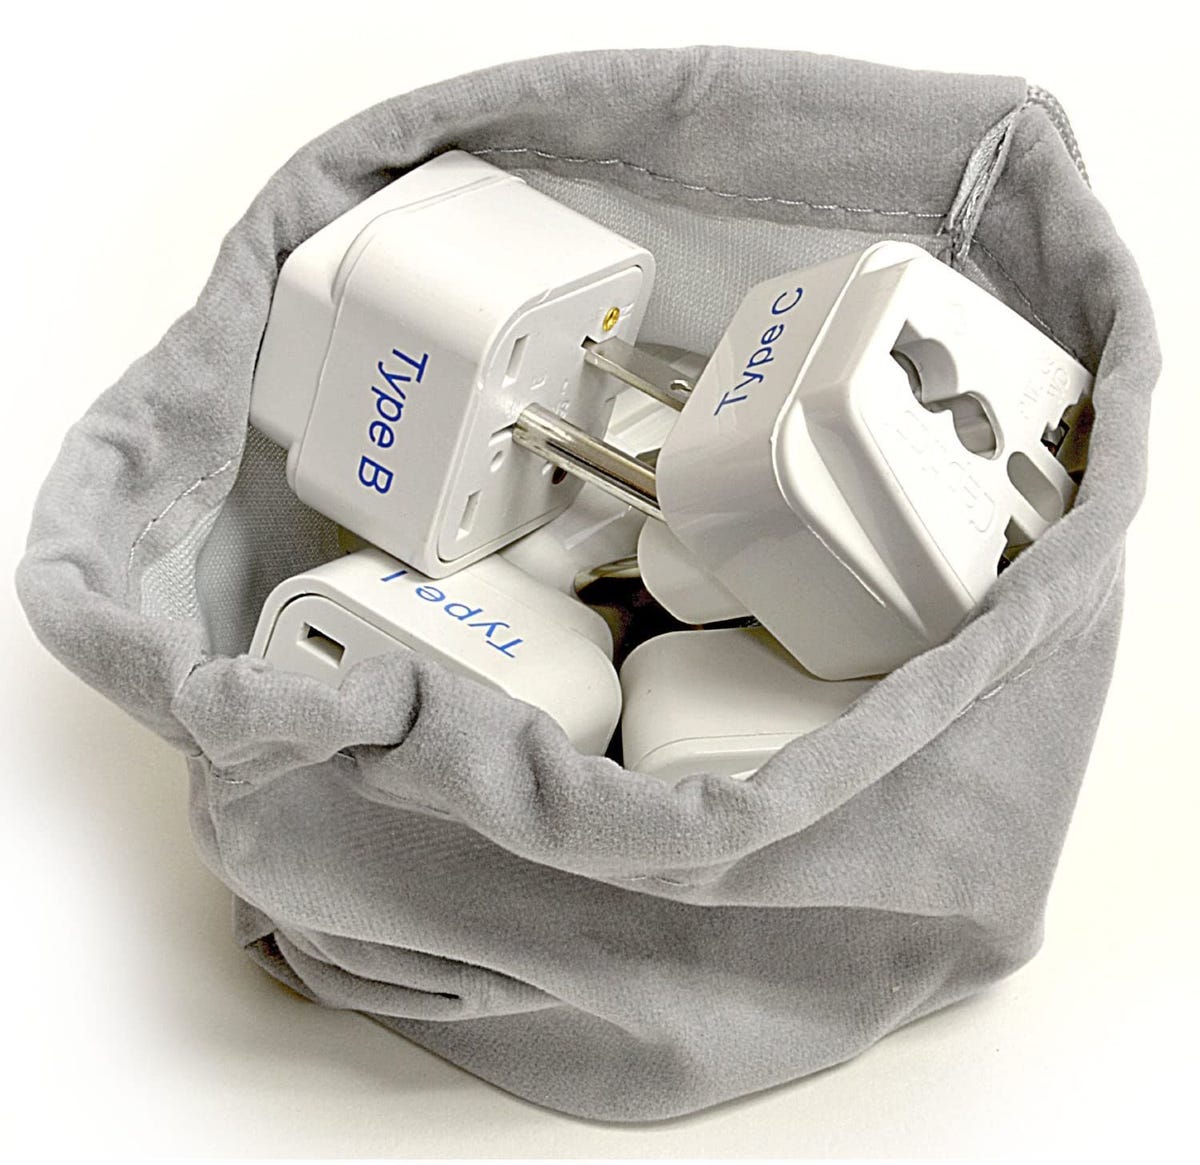 A closeup of the Ceptics adapters in a small bag.